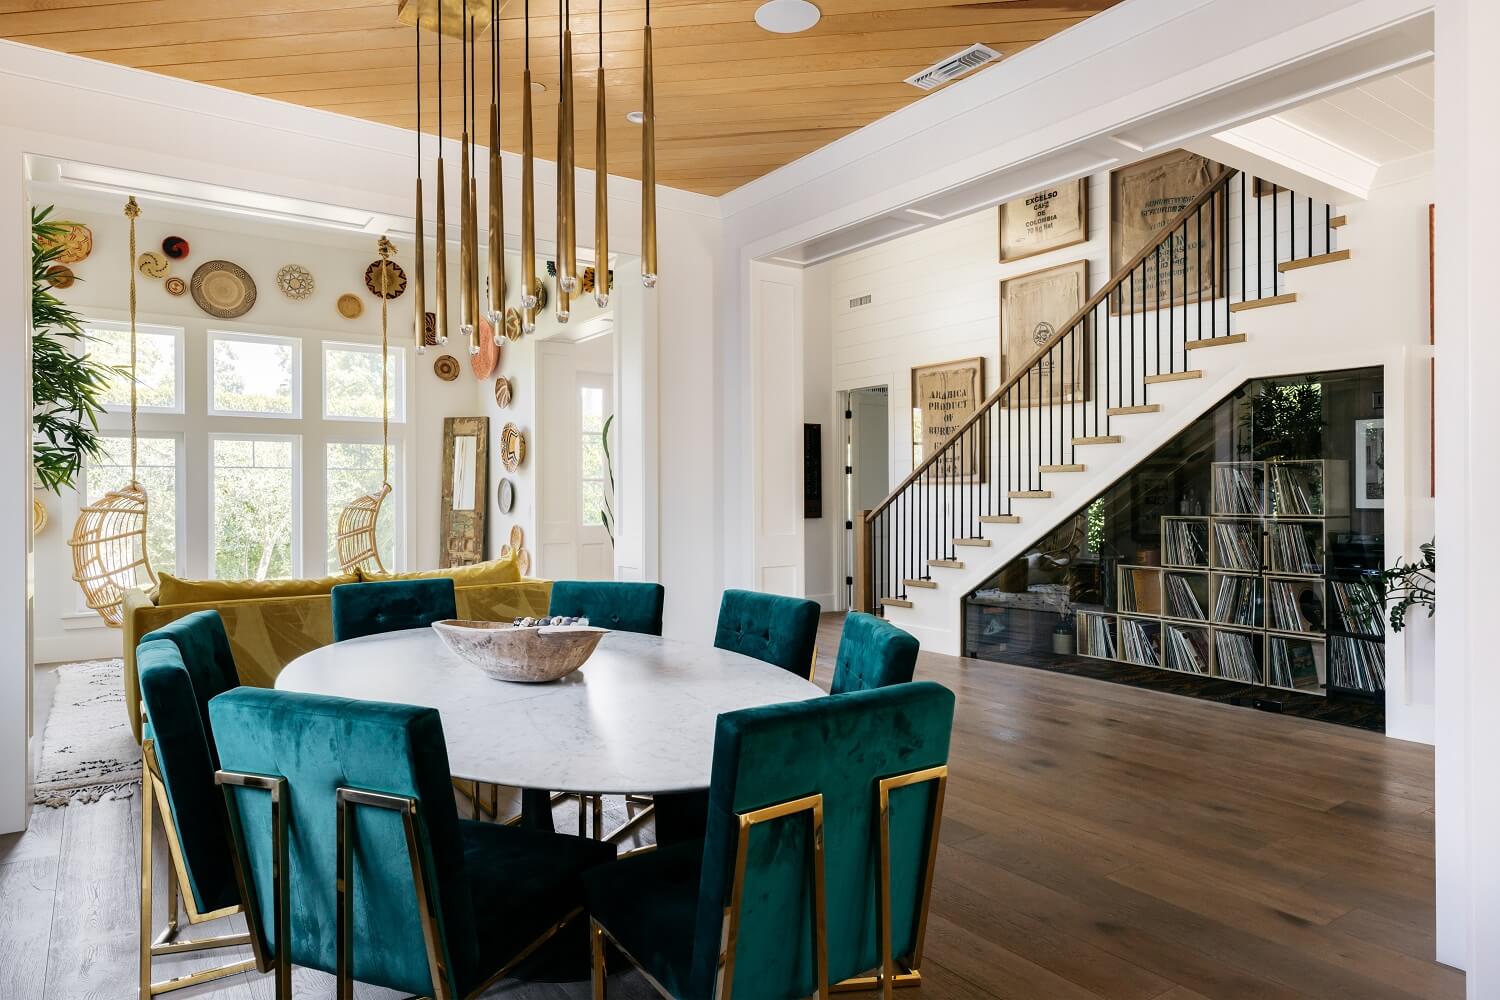 oval-dining-table-green-chairs-music-cabinets-daveed-diggs-emmy-raver-lampman-nordroom